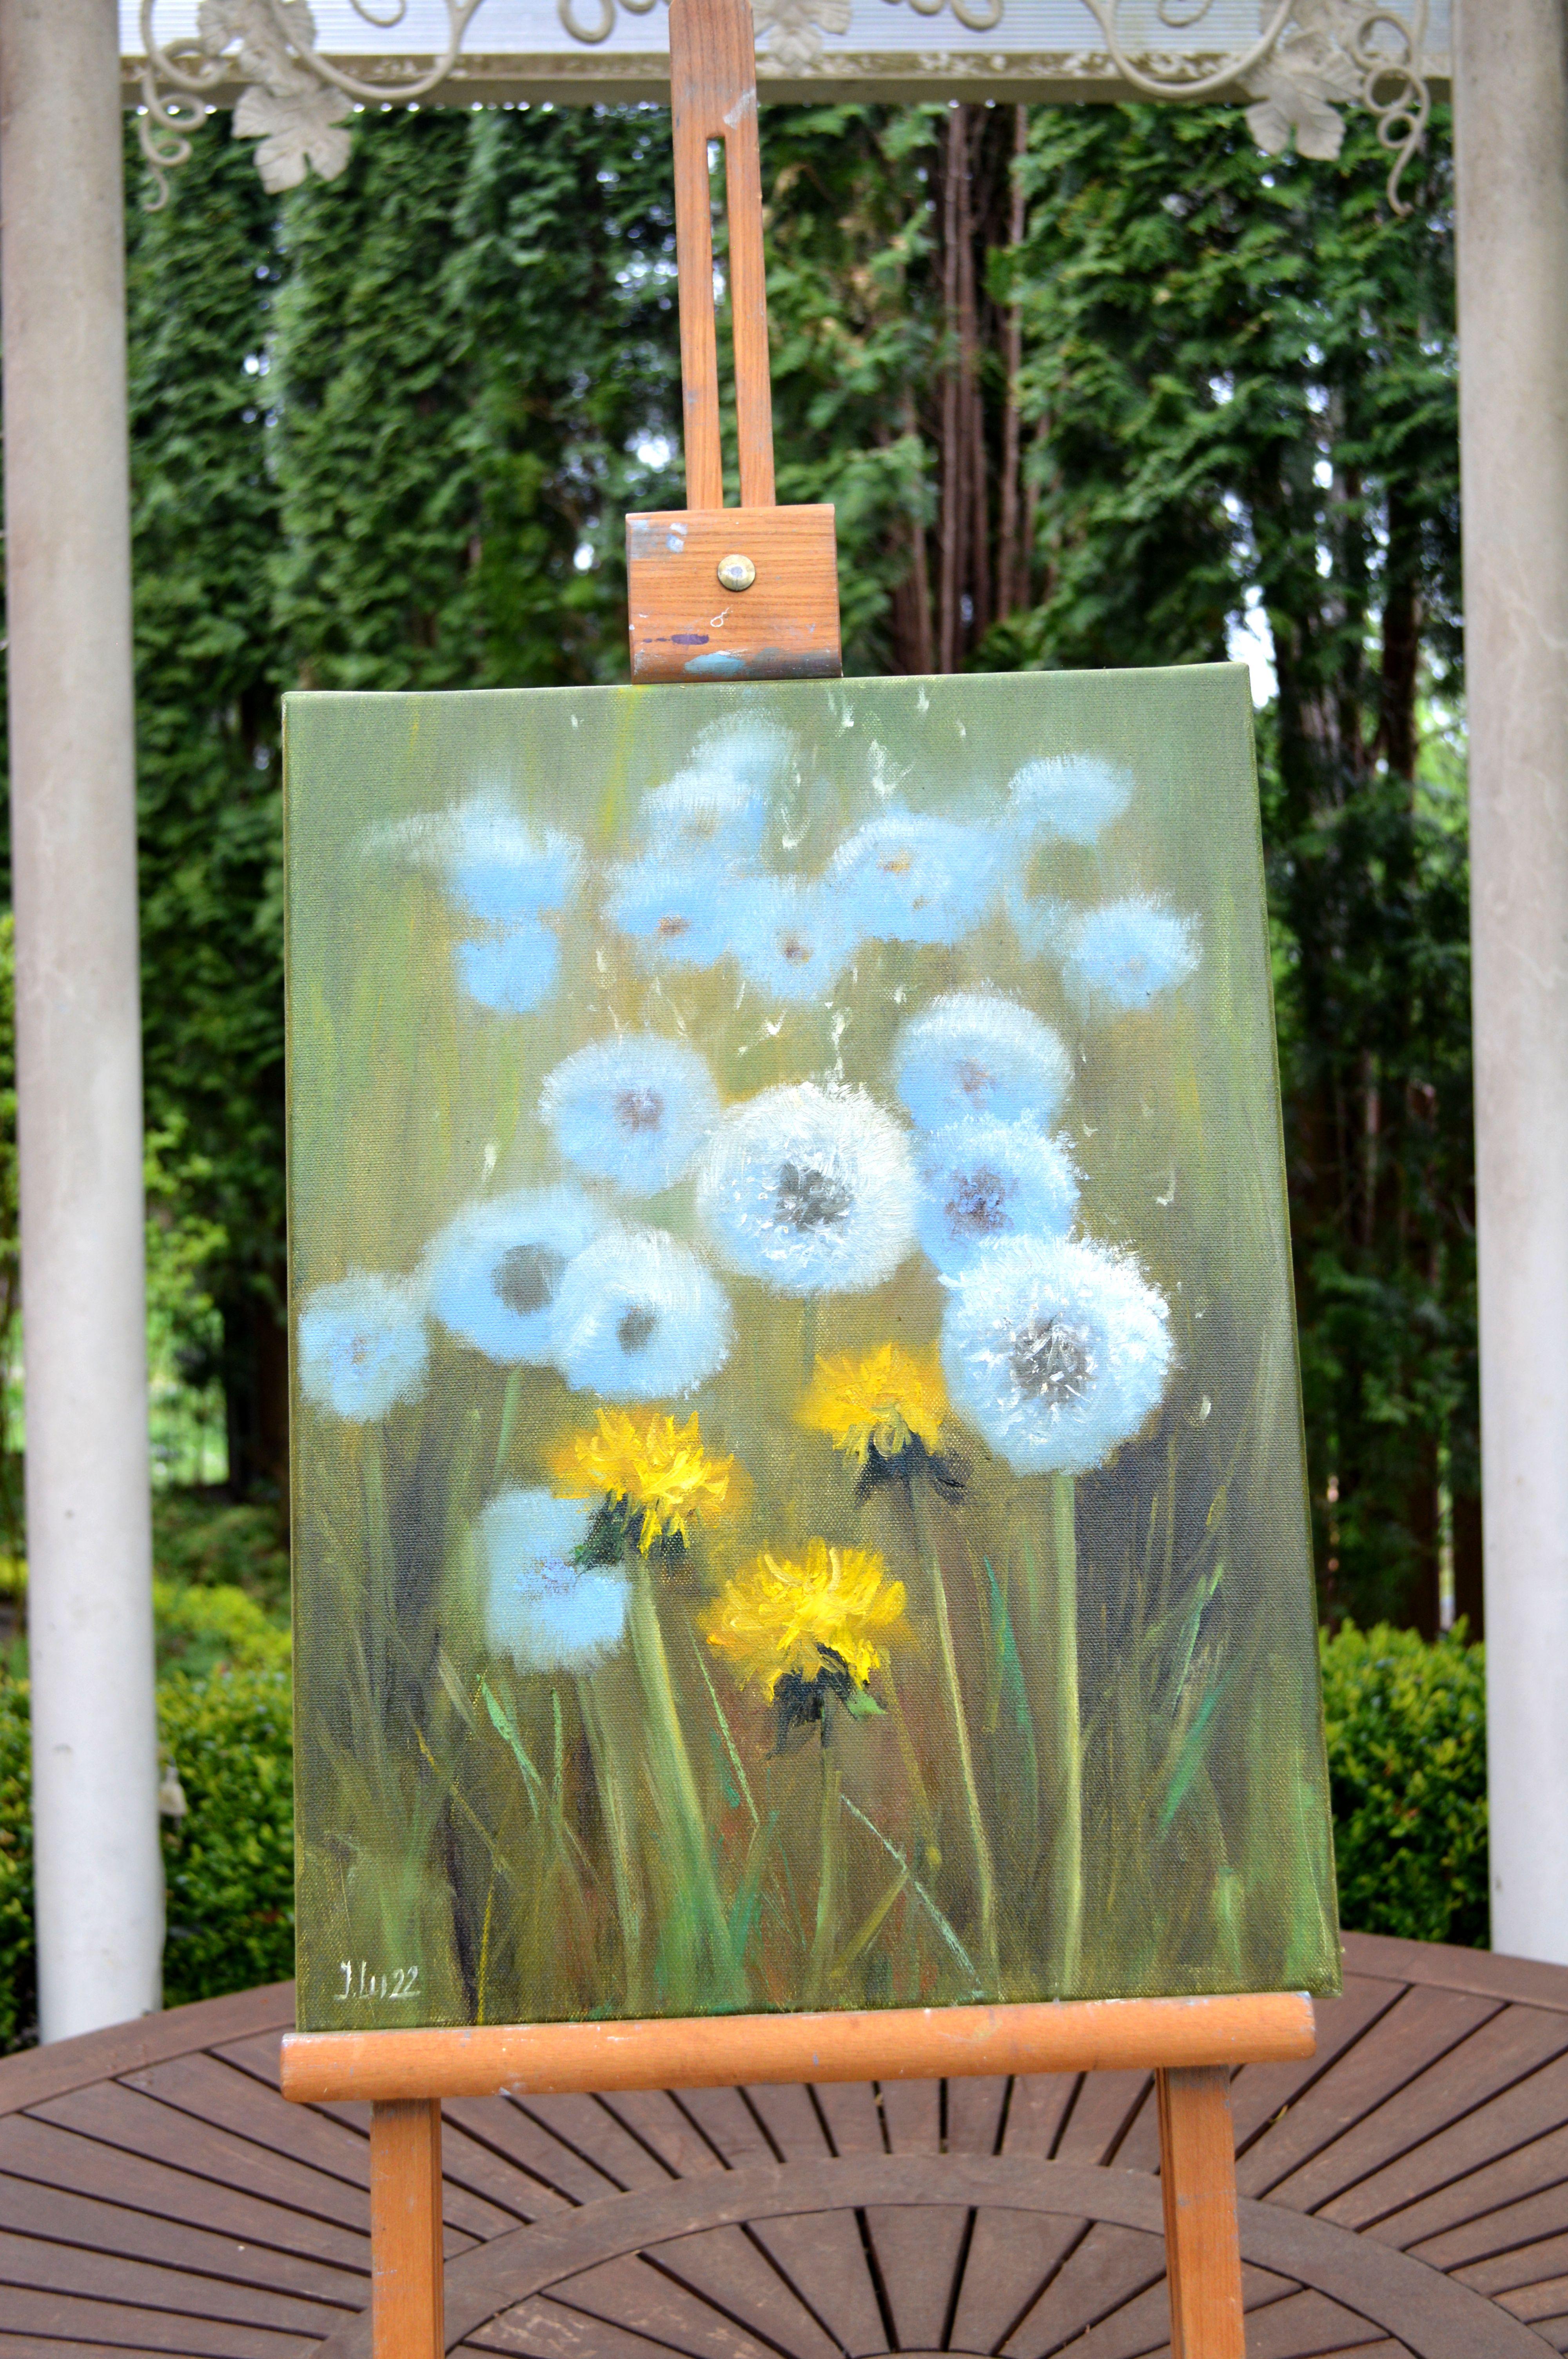 This work symbolizes our wonderful, beautiful and fragile, like a crystal world.
The magic field of solar dandelions from which it is impossible to take your eyes off.
A short moment and there will be no trace of them.
In this oil painting, I sought